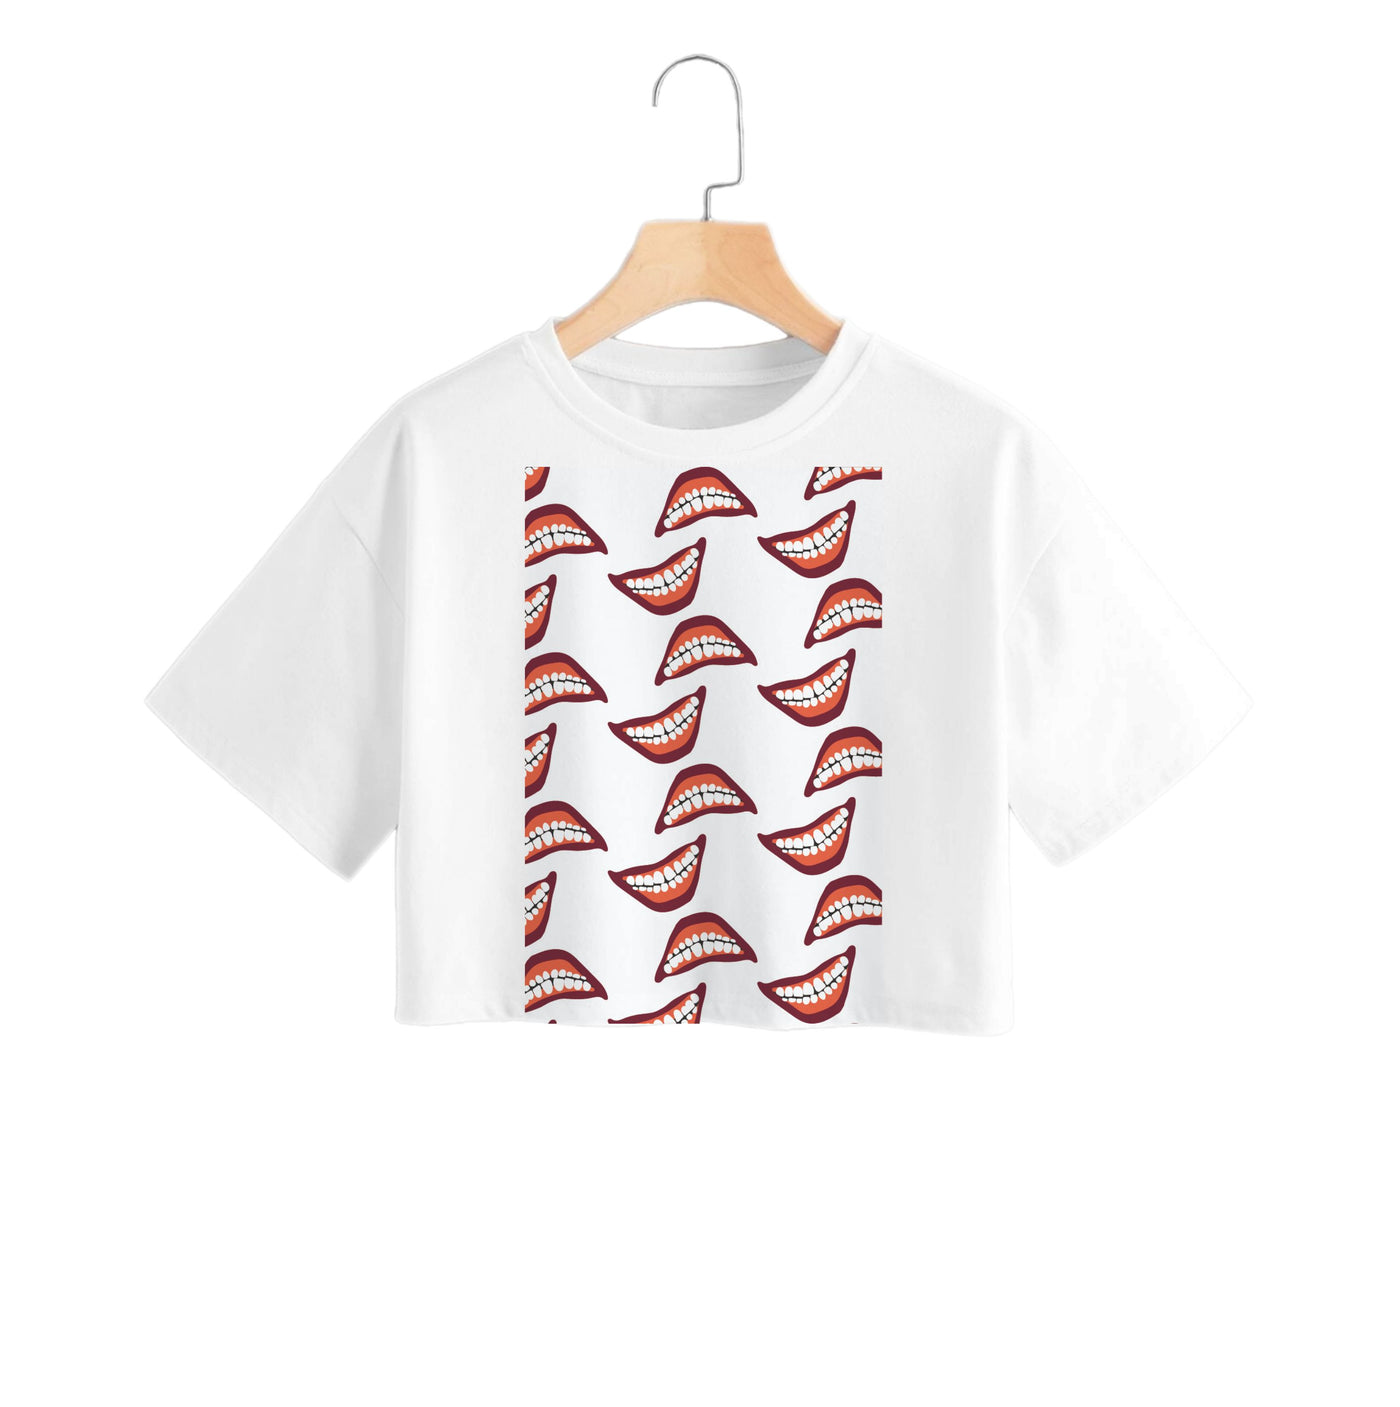 Mouth Pattern - American Horror Story Crop Top